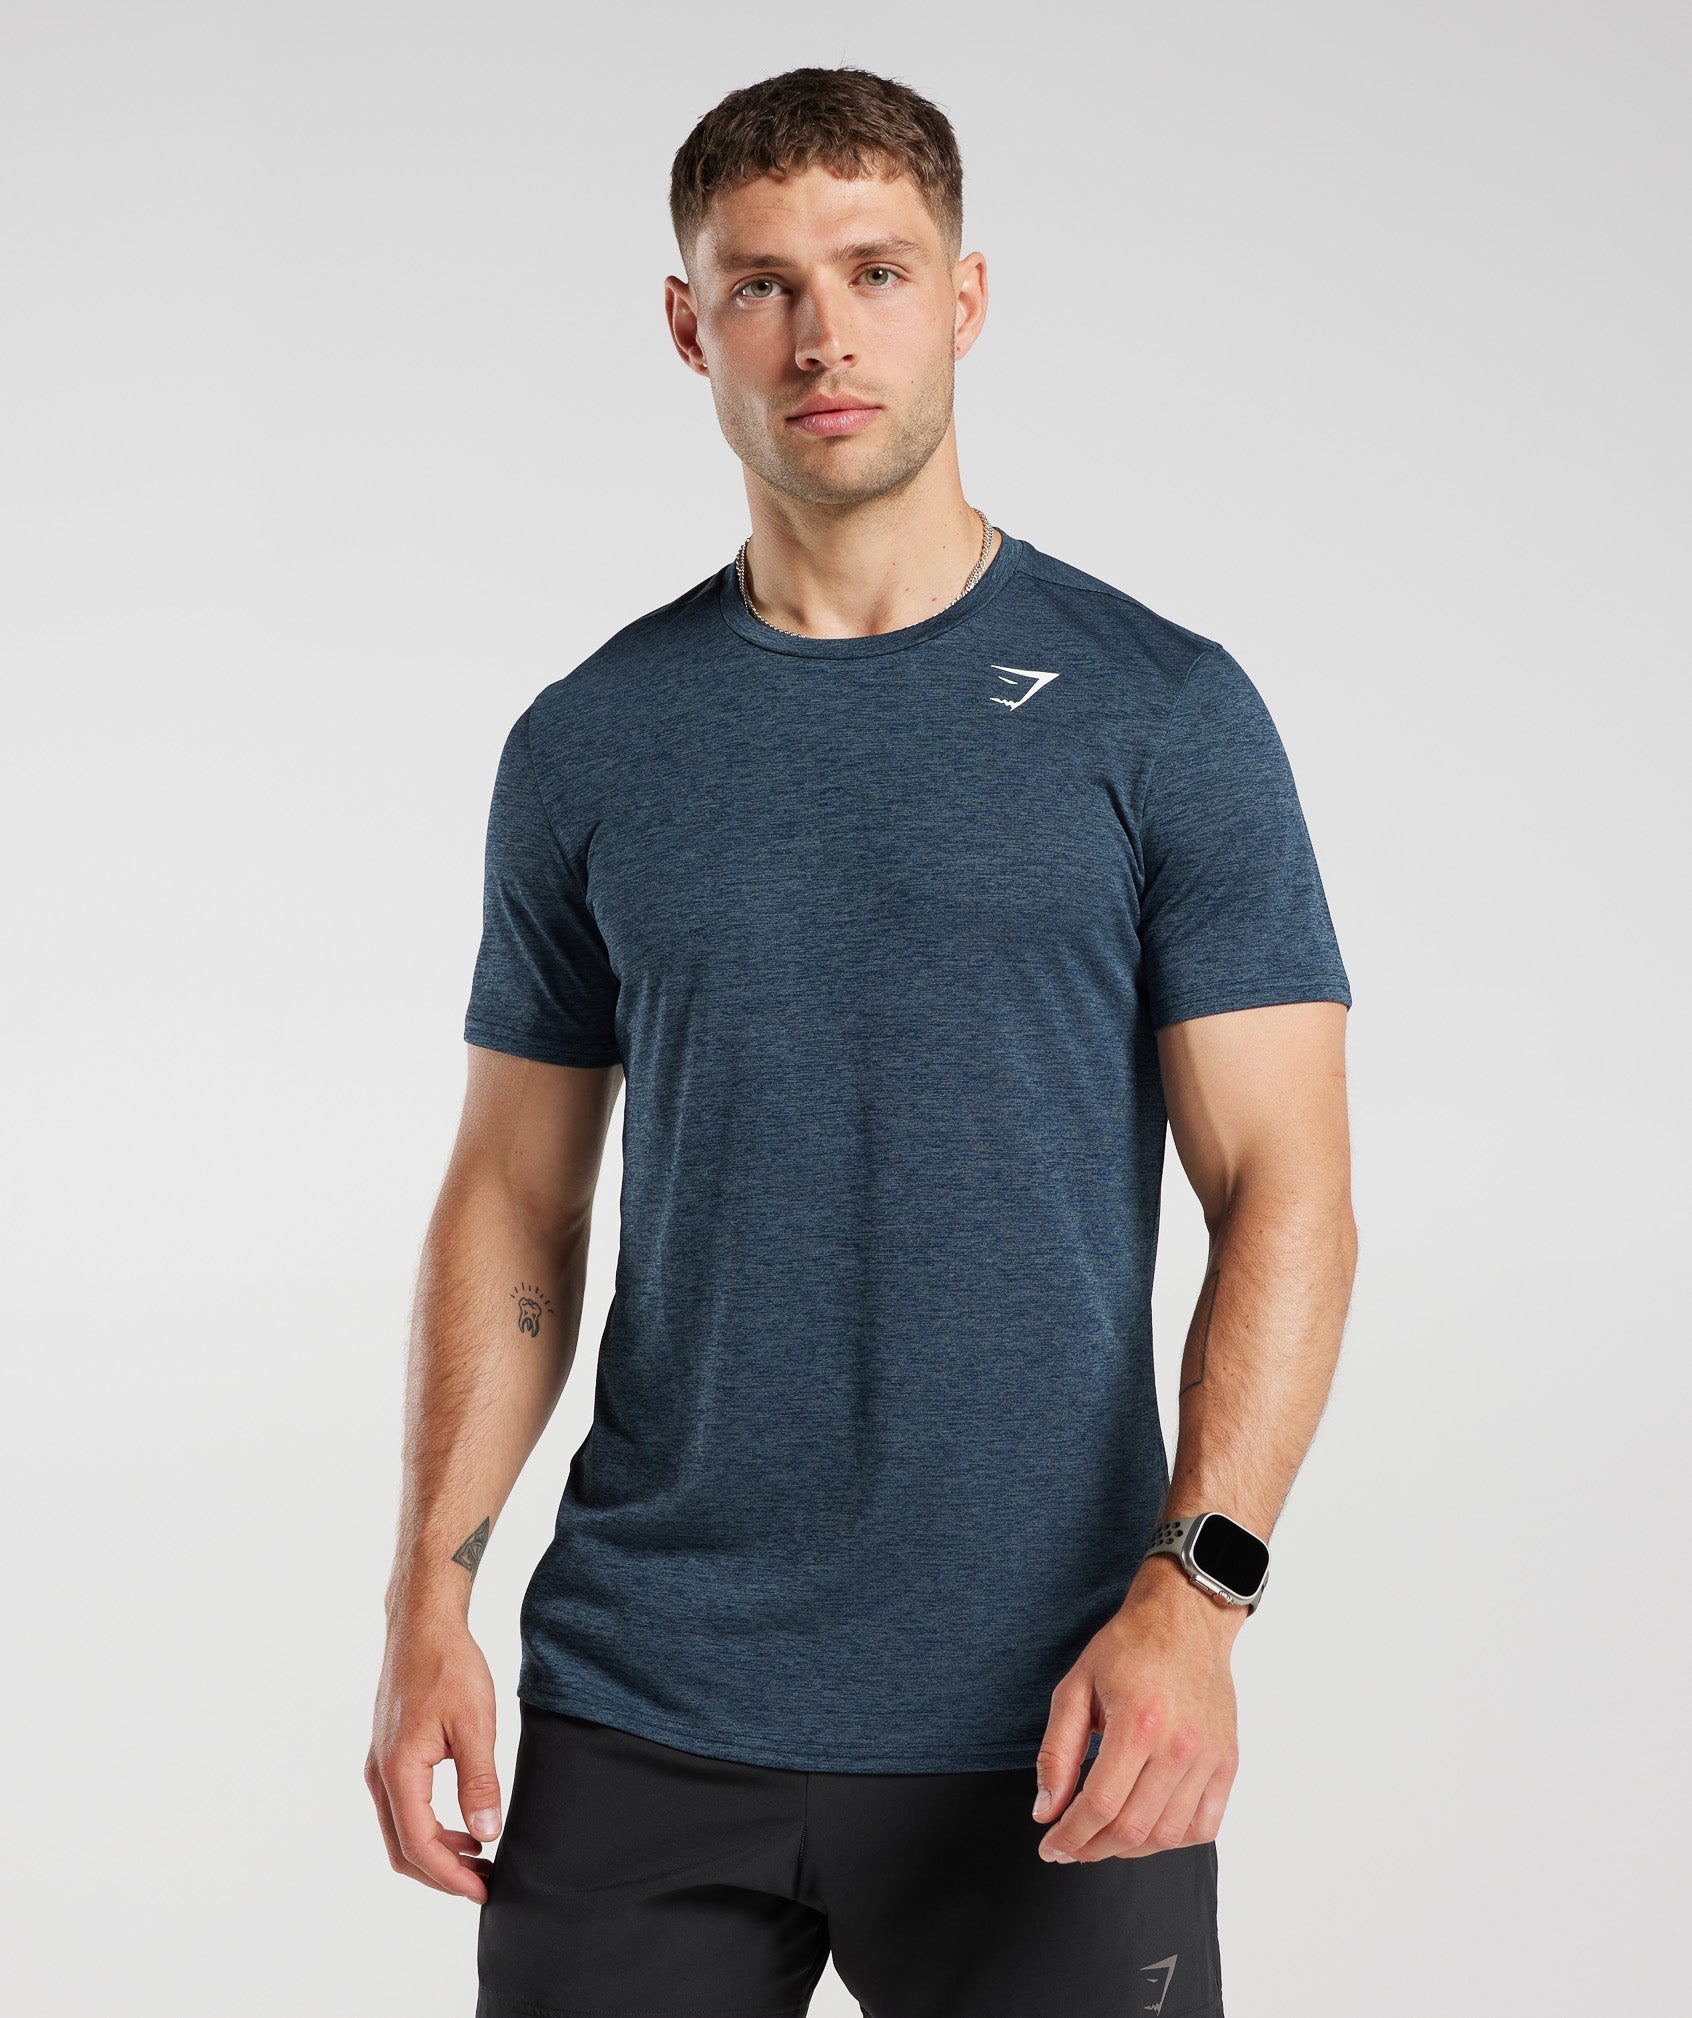 Arrival Marl T-Shirt in Navy/Smokey Teal Marl - view 1